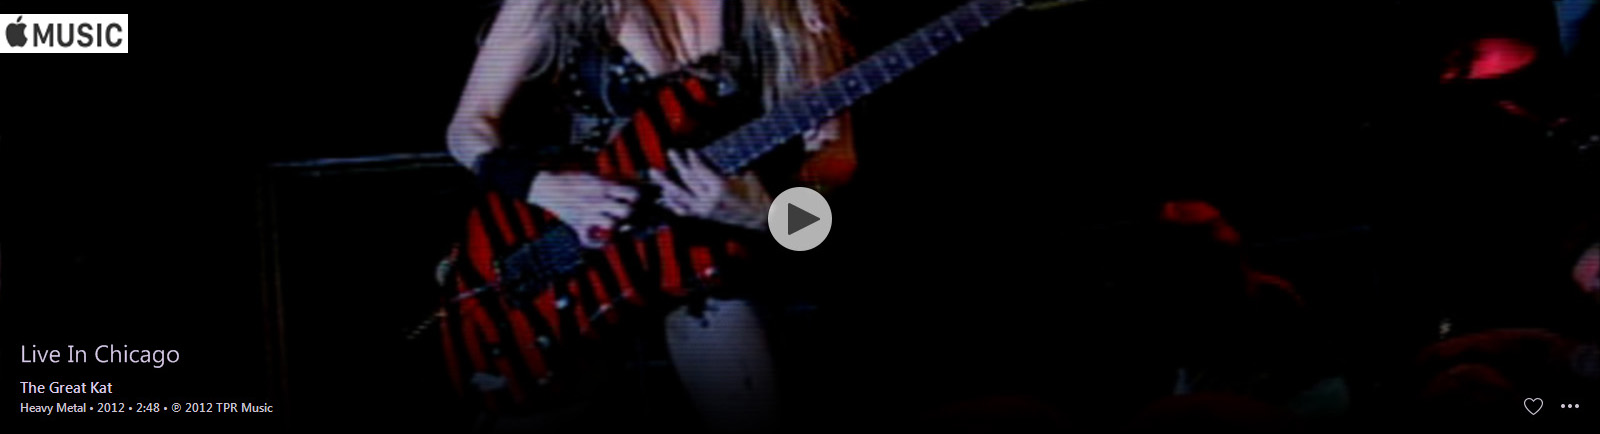 APPLE MUSIC is NOW STREAMING The Great Kat's "LIVE IN CHICAGO" MUSIC VIDEO!